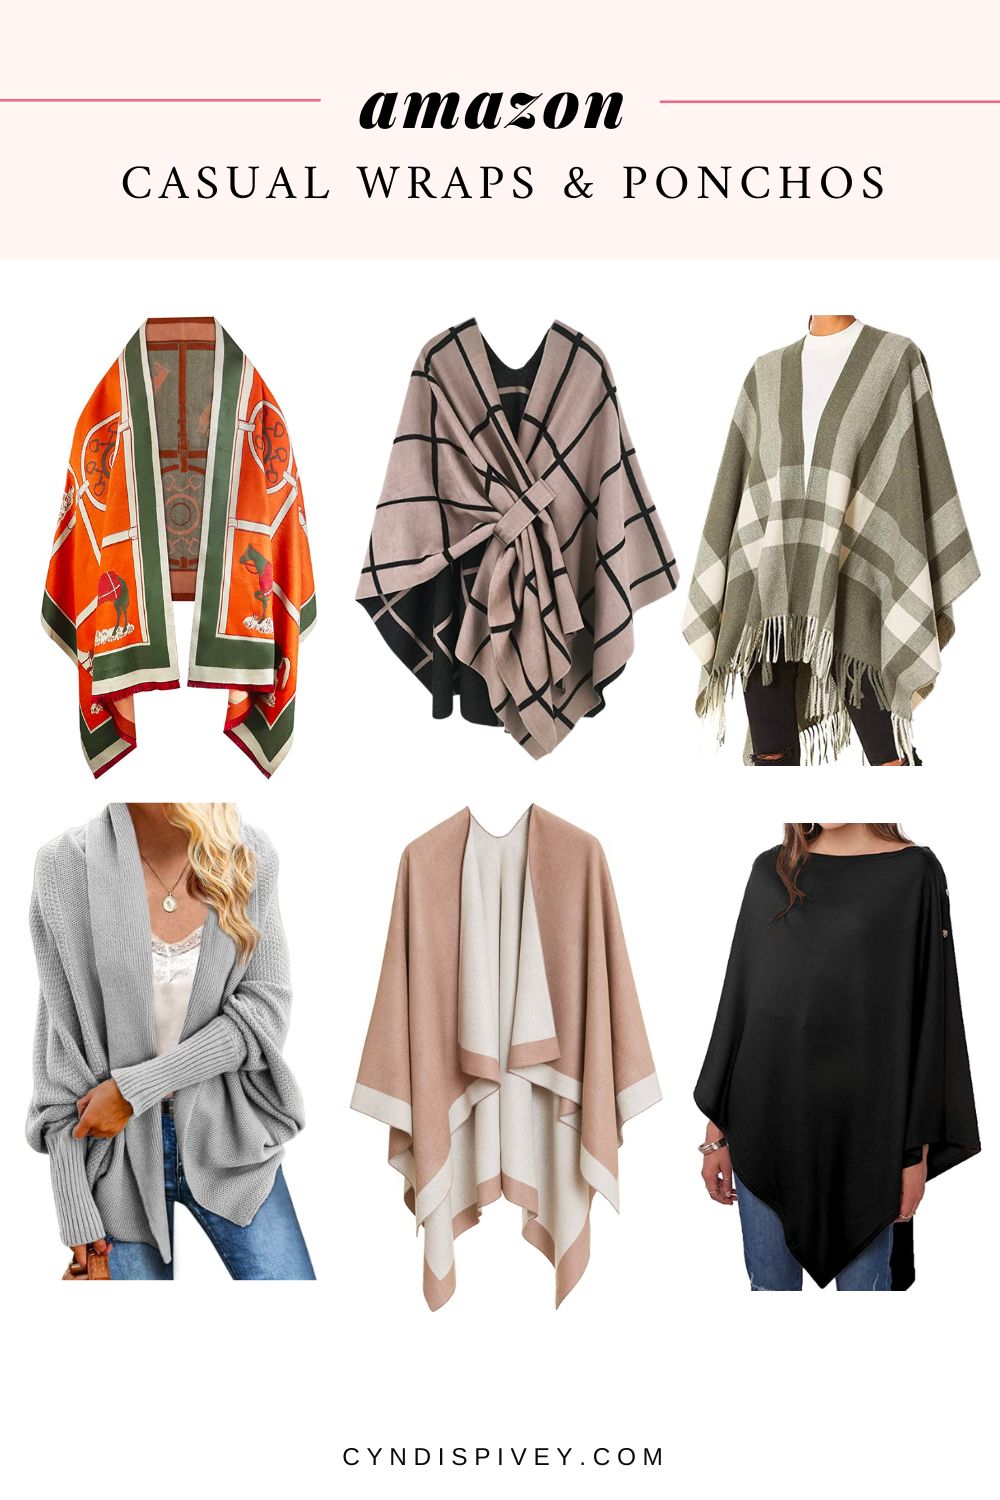 Casual Wraps and Ponchos from Amazon for Fall